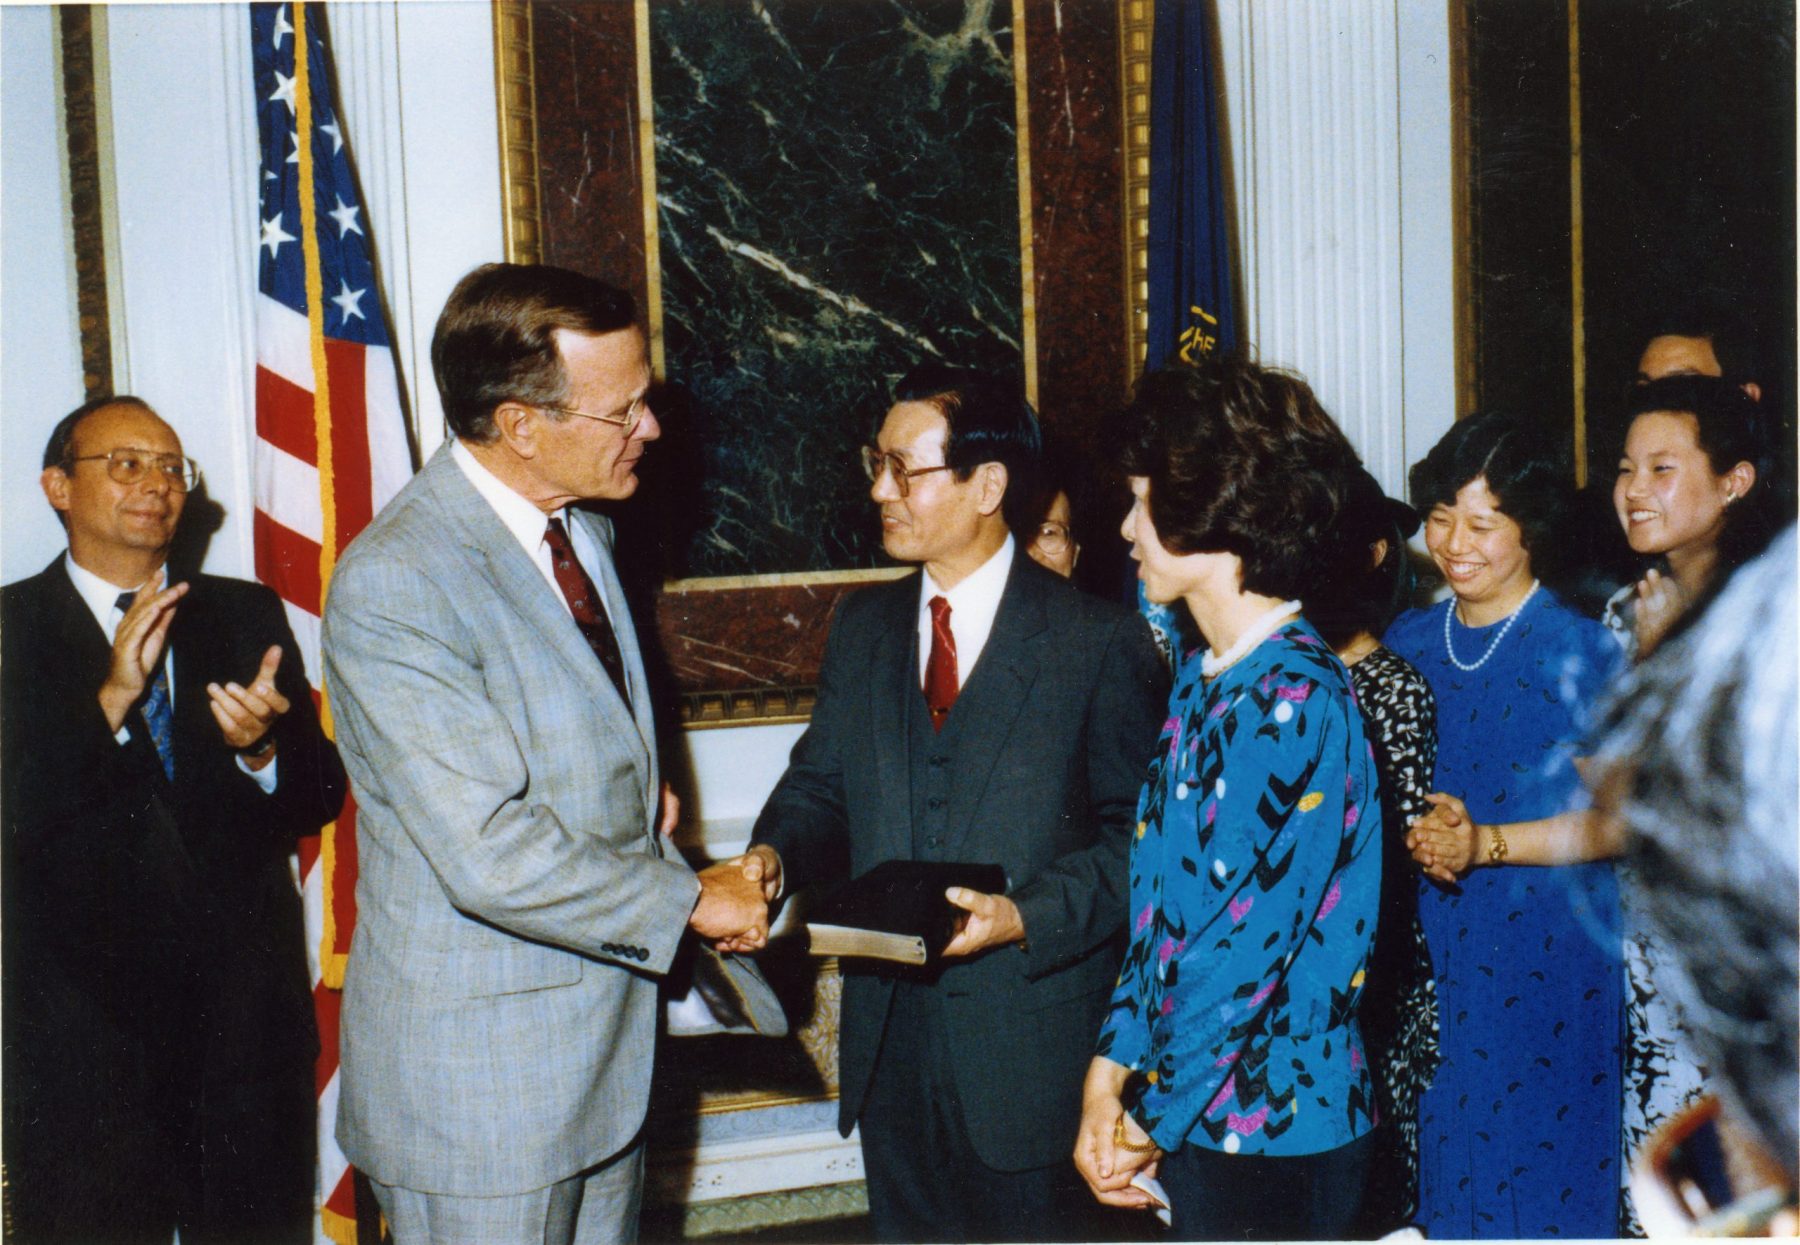 Vice President George H.W. Bush shakes hands with Dr. James S. C. Chao after swearing in Federal Maritime Commission Chairman Elaine Chao.